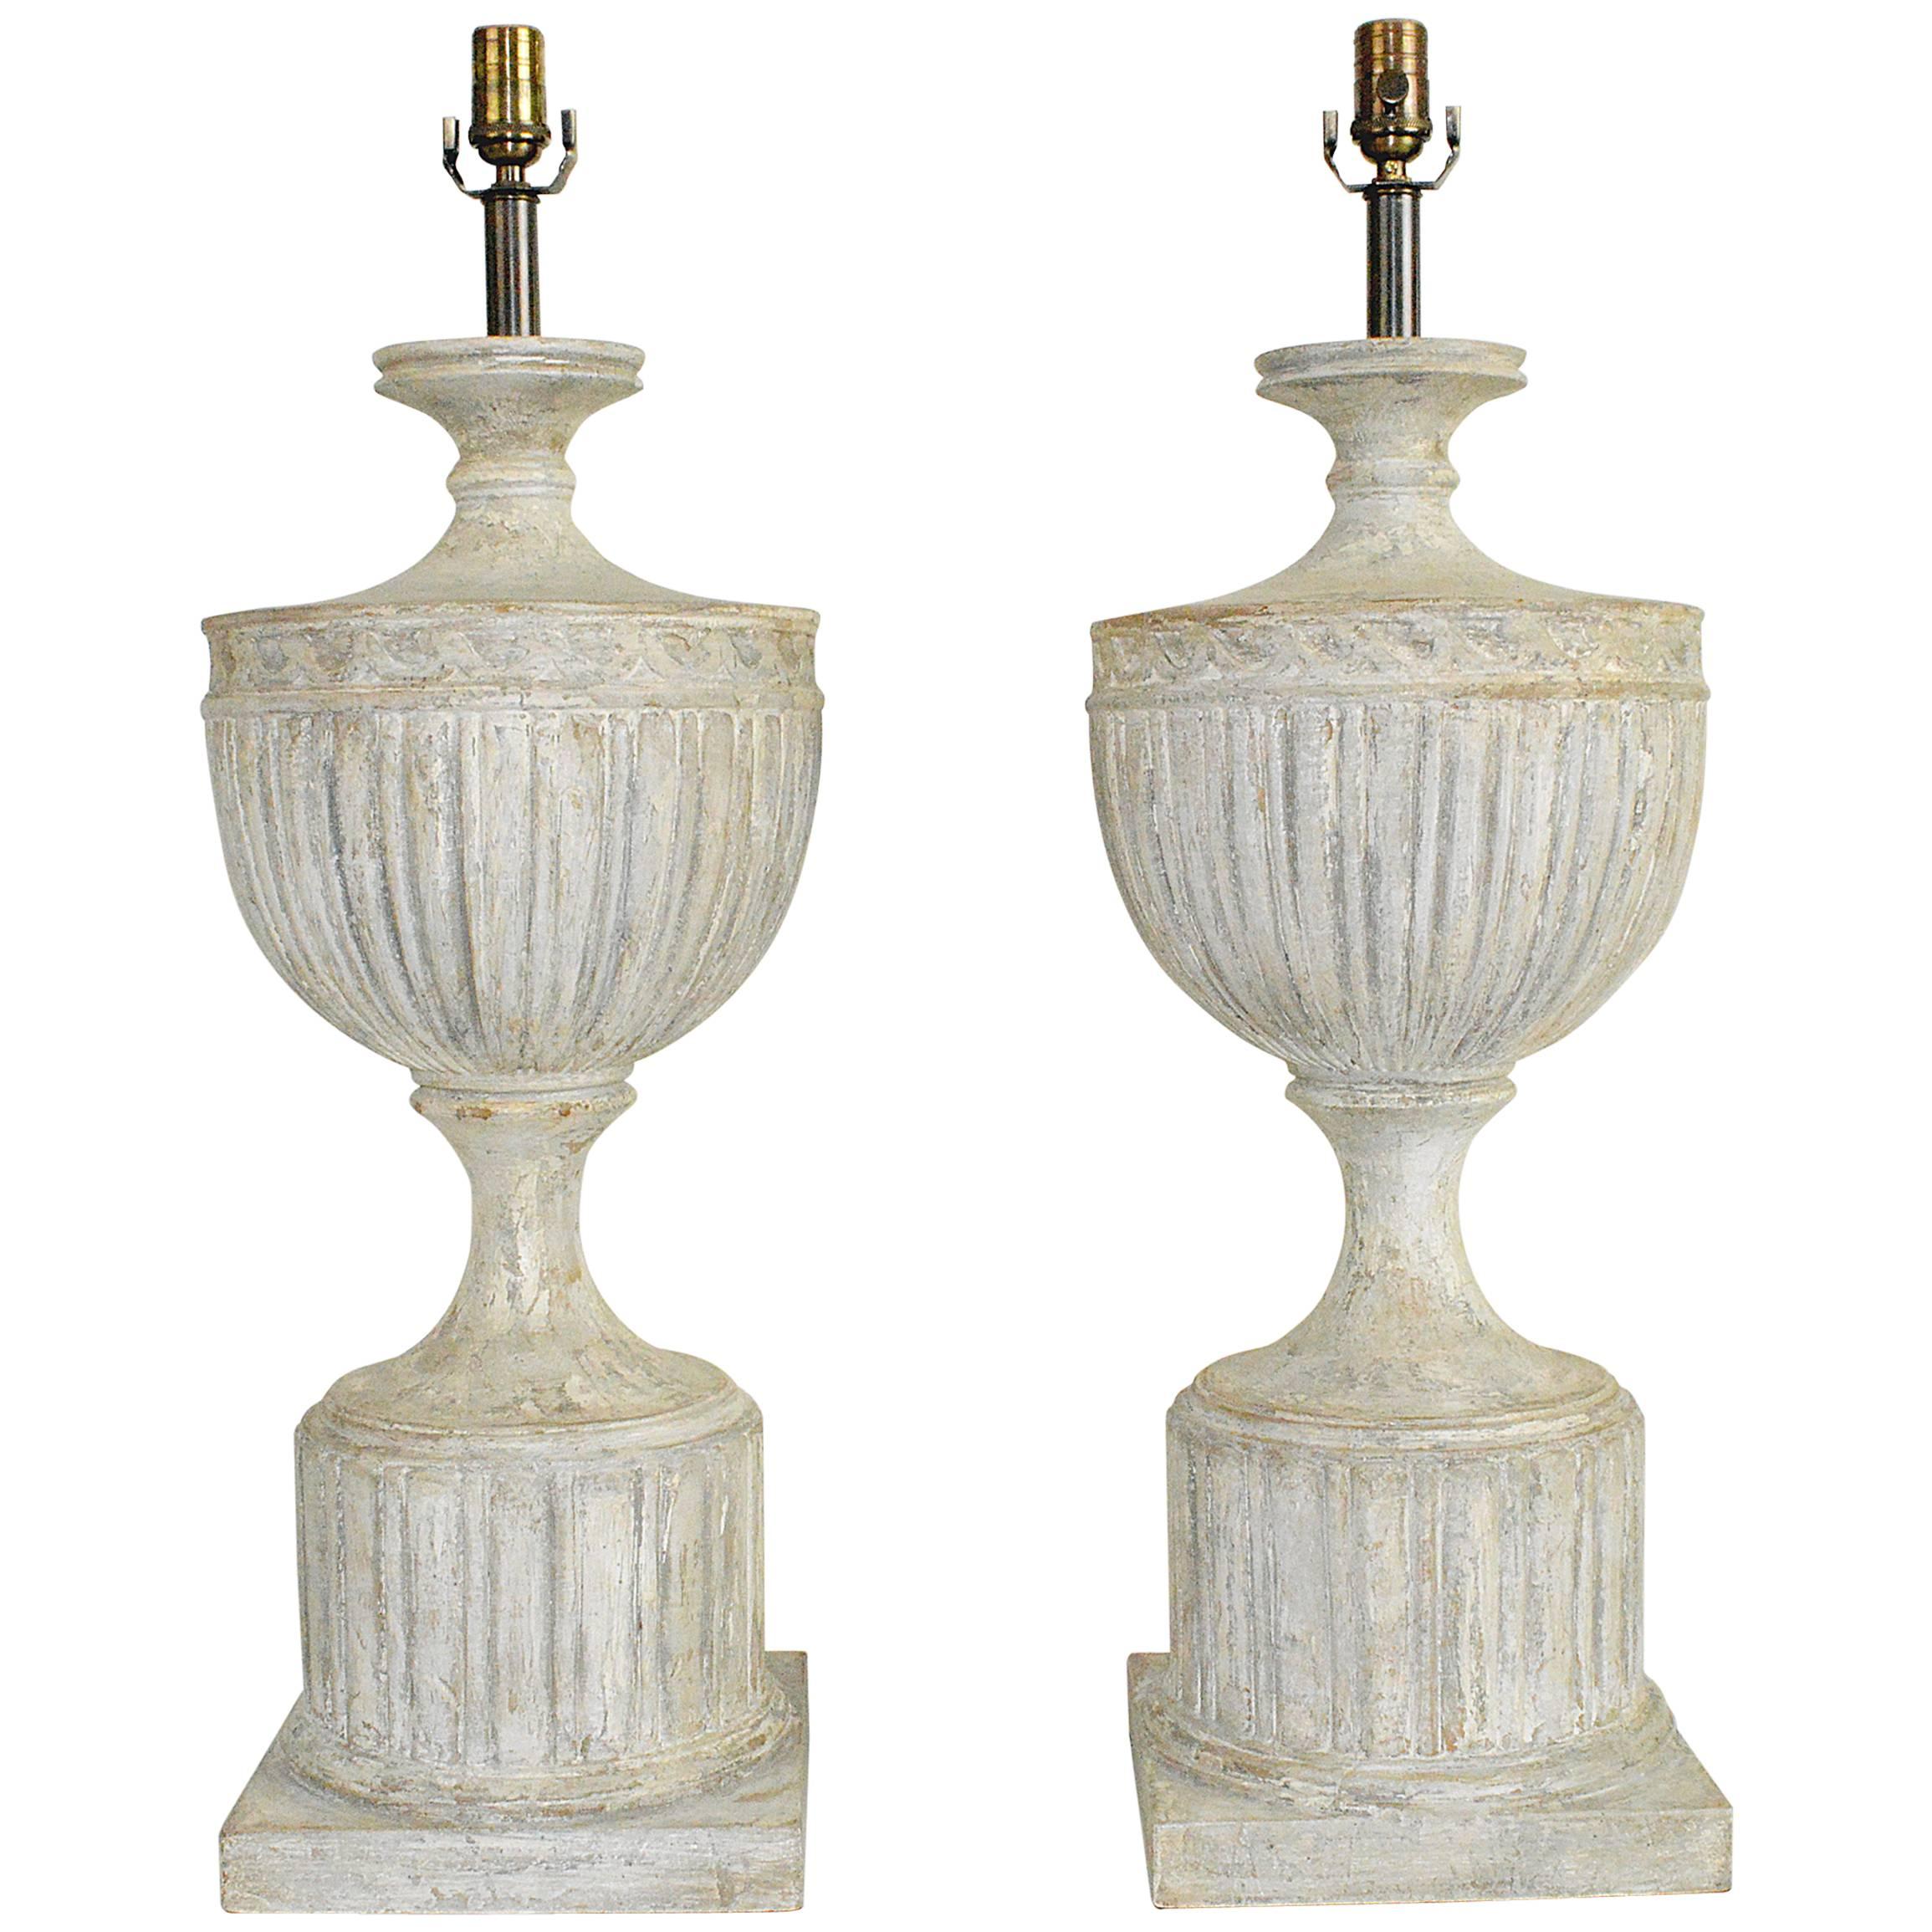 Pair of Large Neoclassical Style Carved Wood Table Lamps